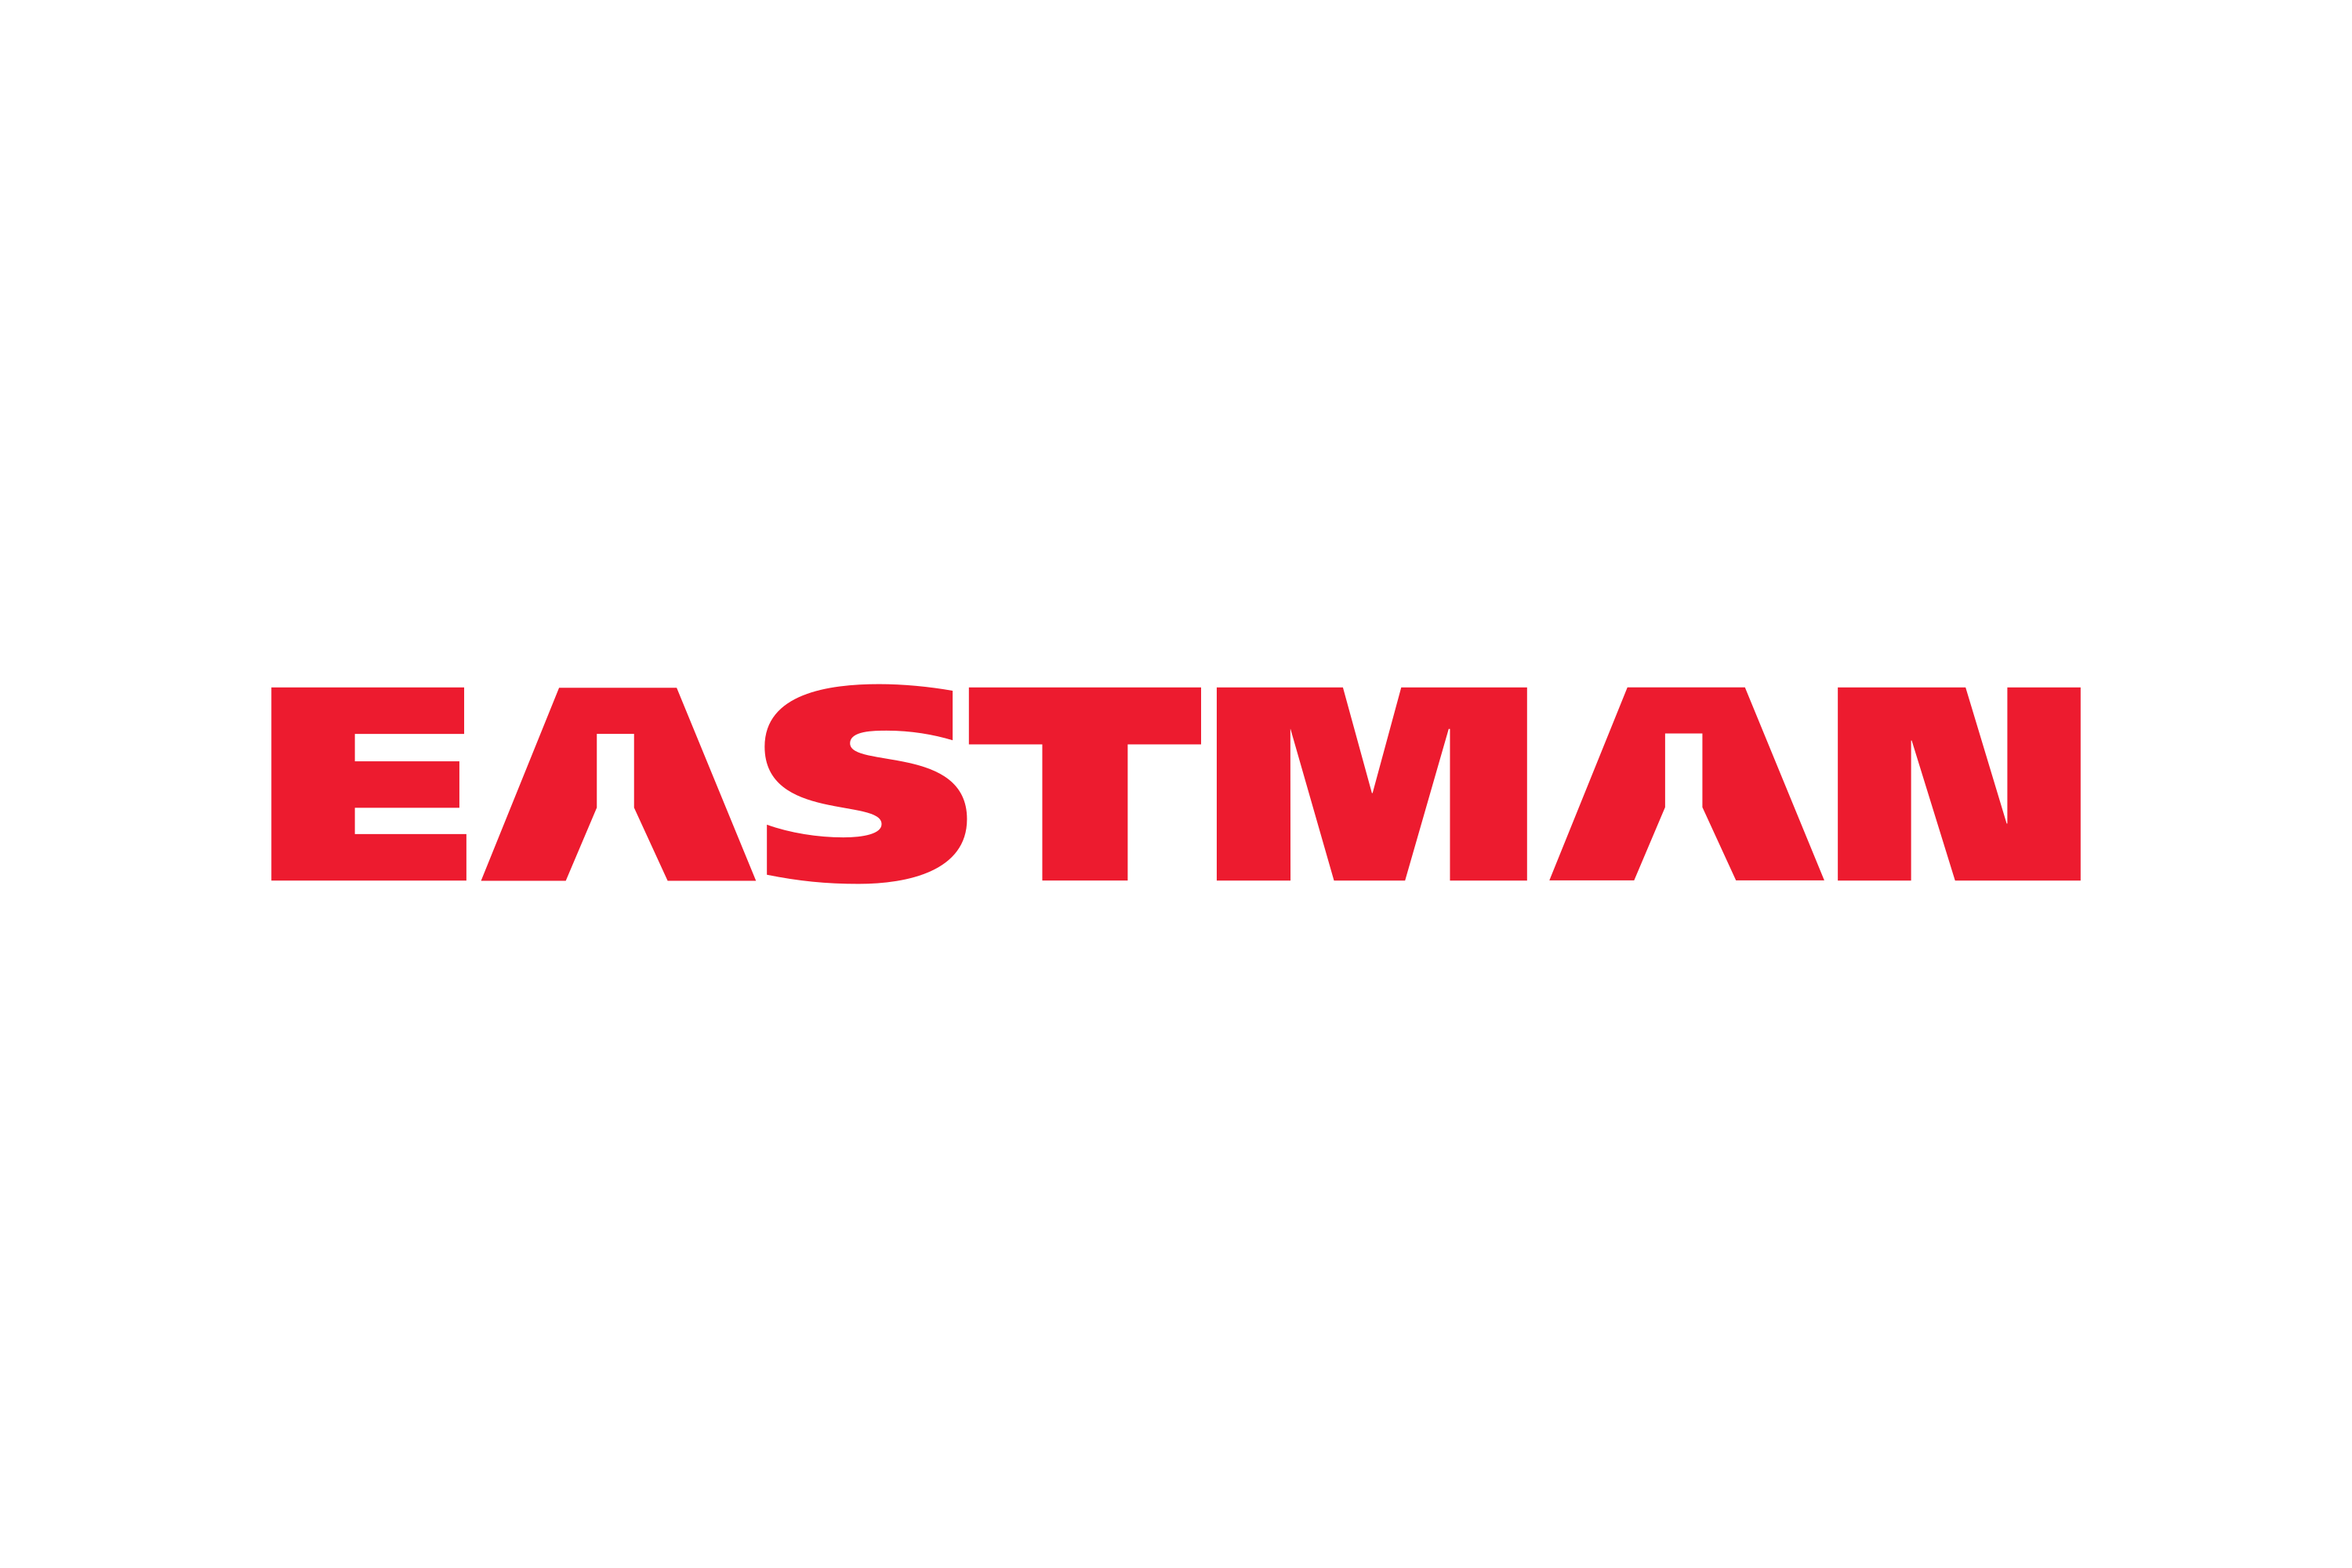 Download Eastman Chemical Company Logo in SVG Vector or PNG File Format